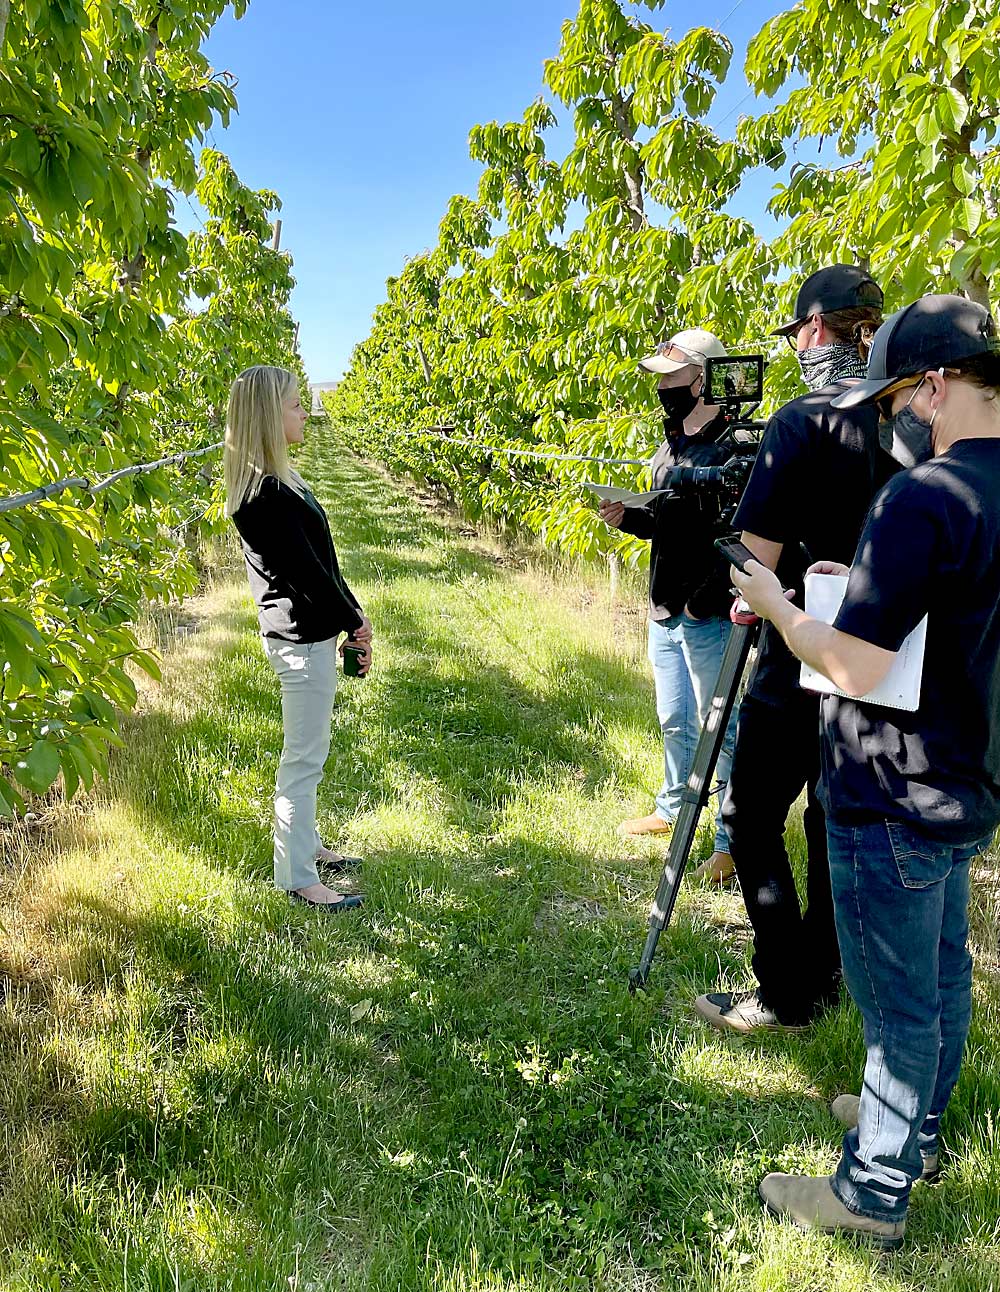 Kellly Pritchett, a nutrition professor at Central Washington University, is interviewed in May at a Tieton, Washington, cherry orchard for a Northwest Cherry Growers video. The video, produced by Digital Vendetta, will be shown at a nutrition conference in June. (Courtesy James Michael/Northwest Cherry Growers)